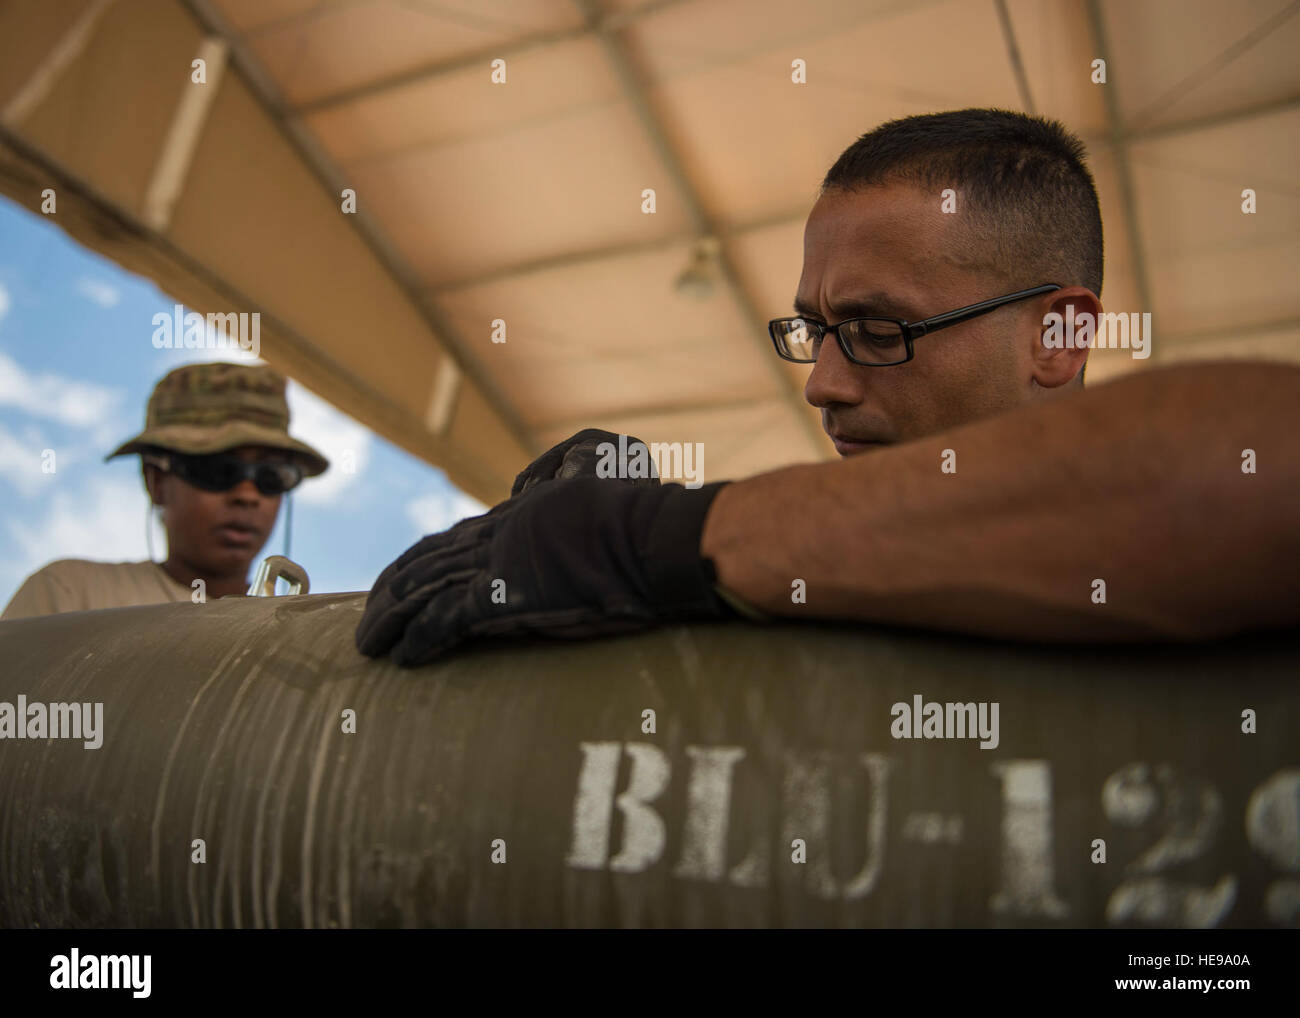 Staff Sgt. Alejandro Medina, 455th Expeditionary Maintenance Squadron Munitions Flight munitions system specialist, helps build a GBU-54 munition at Bagram Airfield, Afghanistan, May 26, 2016. The munitions flight storage is responsible for the accountability of small arms ammunitions to large-scale guided bomb units.  Senior Airman Justyn M. Freeman) Stock Photo